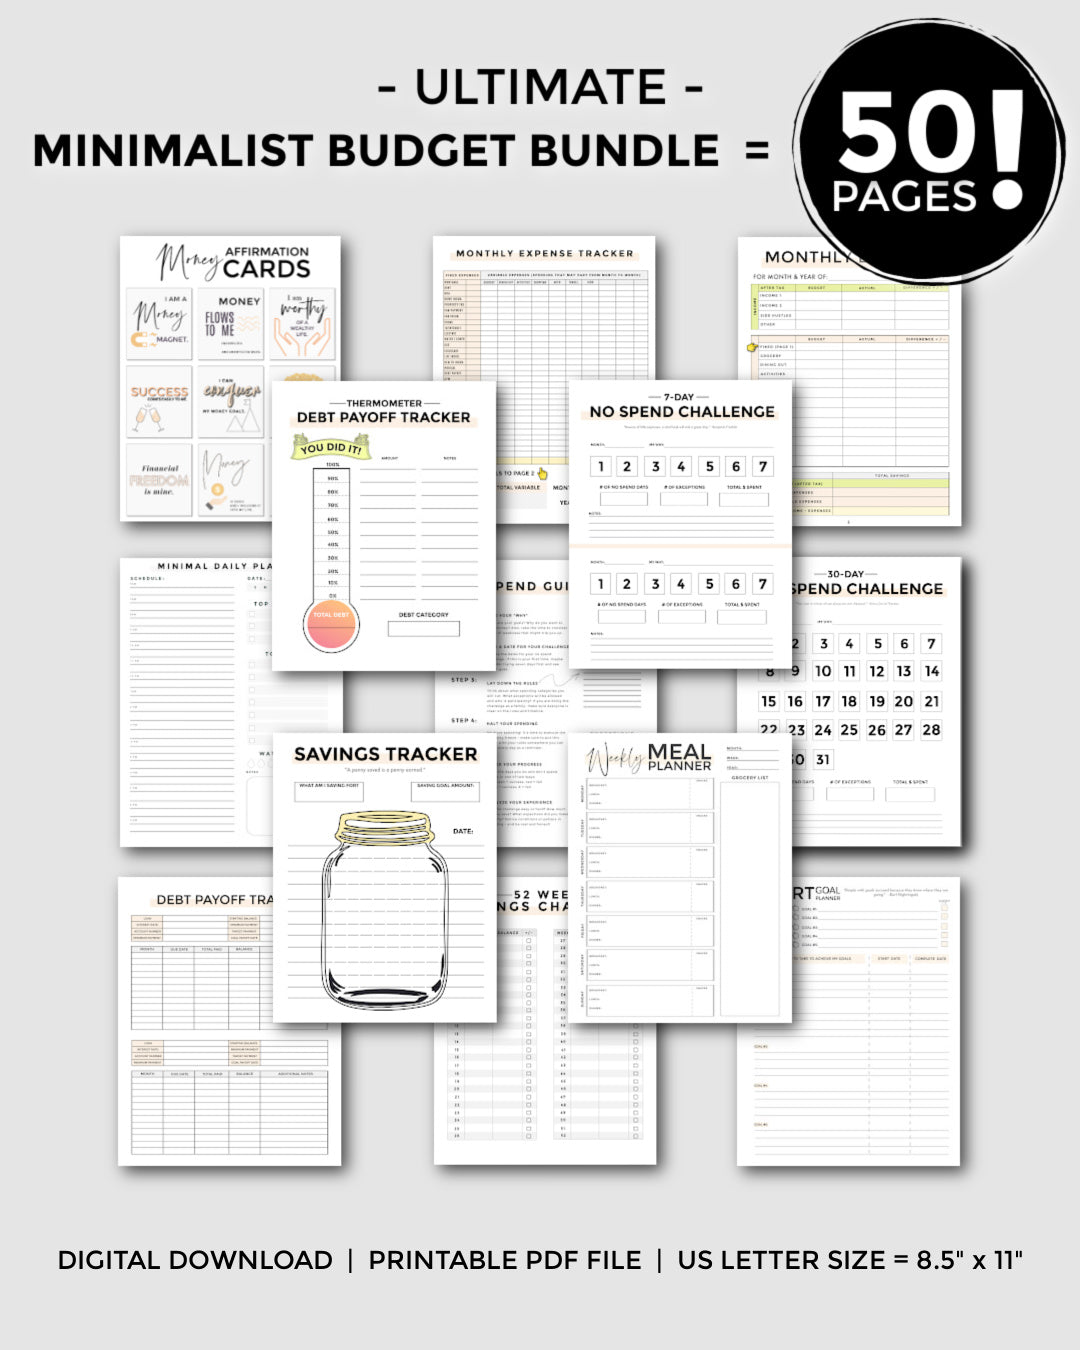 50 pages of minimalist budget planner printables